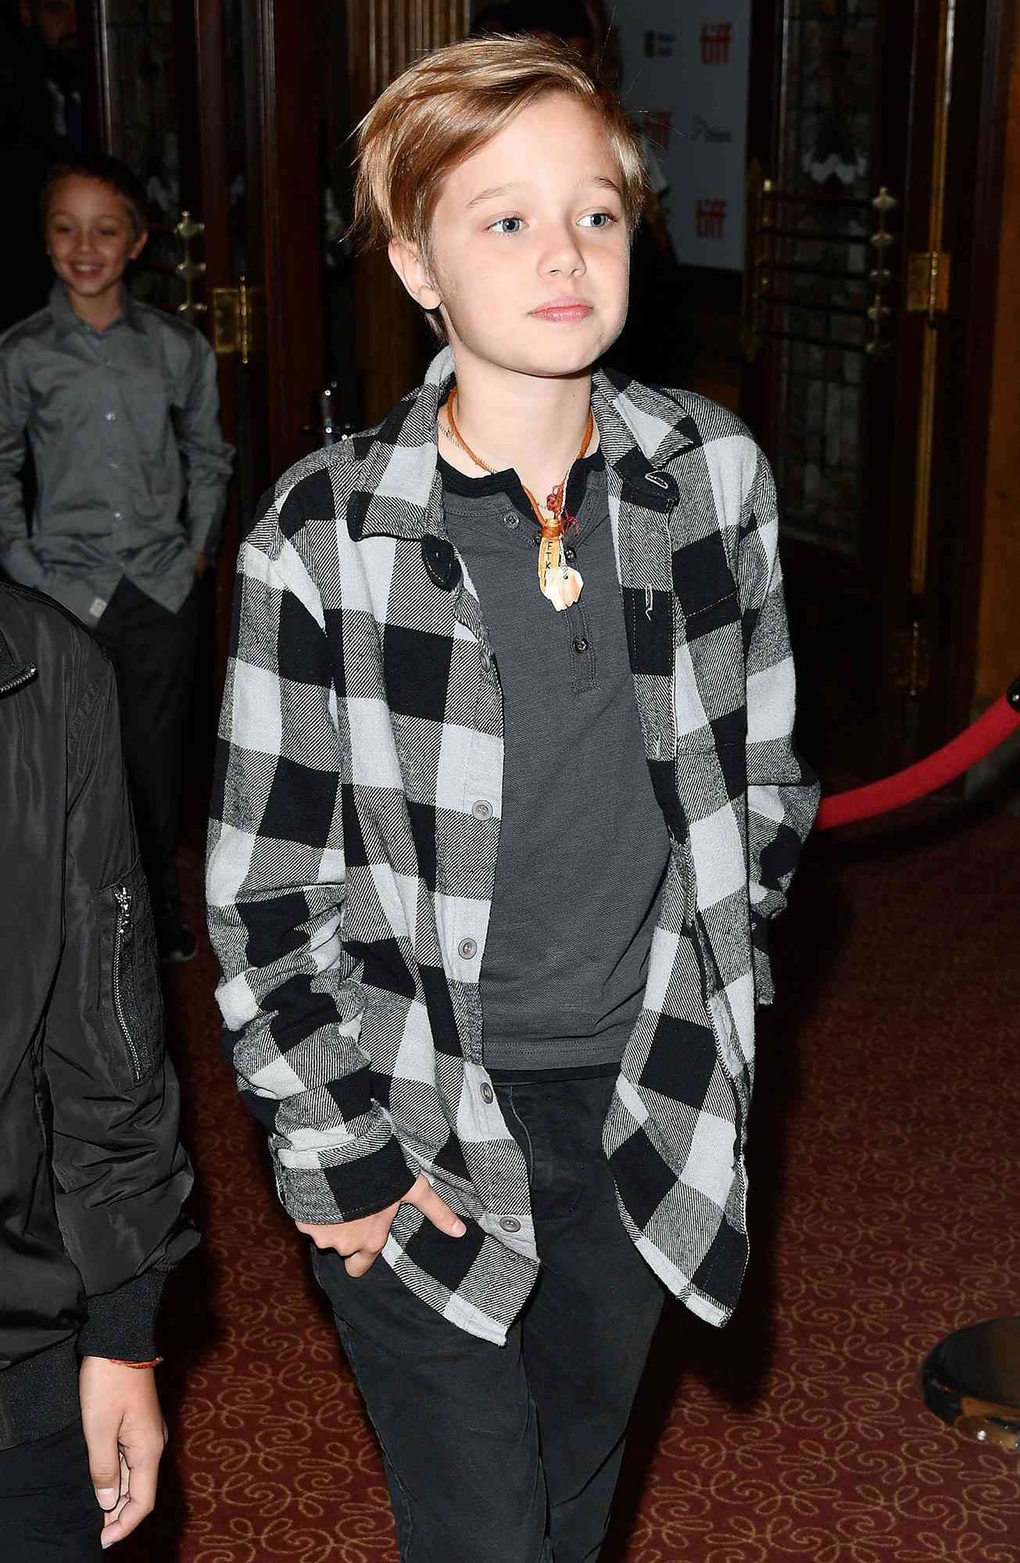 Shiloh Jolie-Pitt at age 17: Shaved her head for a special reason, life is curious - 5